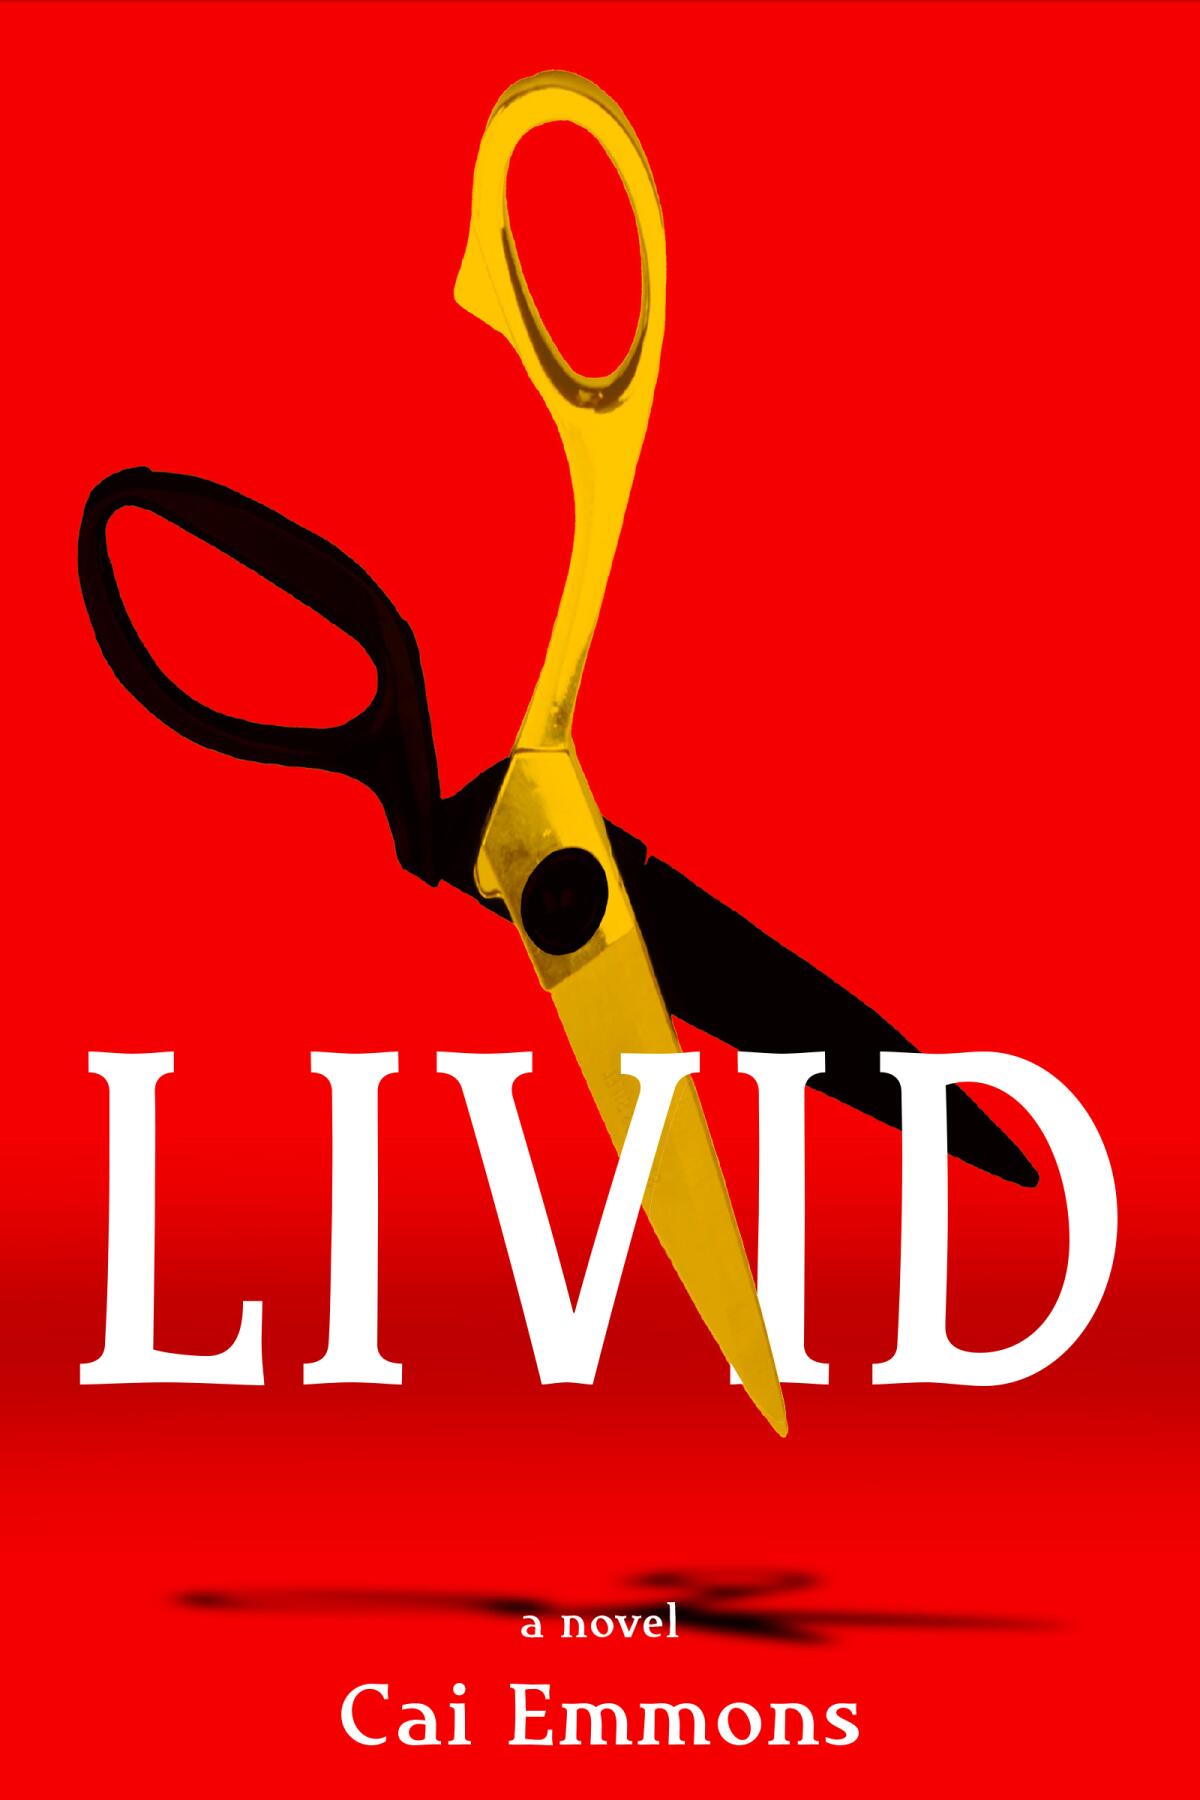 "Livid," by Cai Emmons